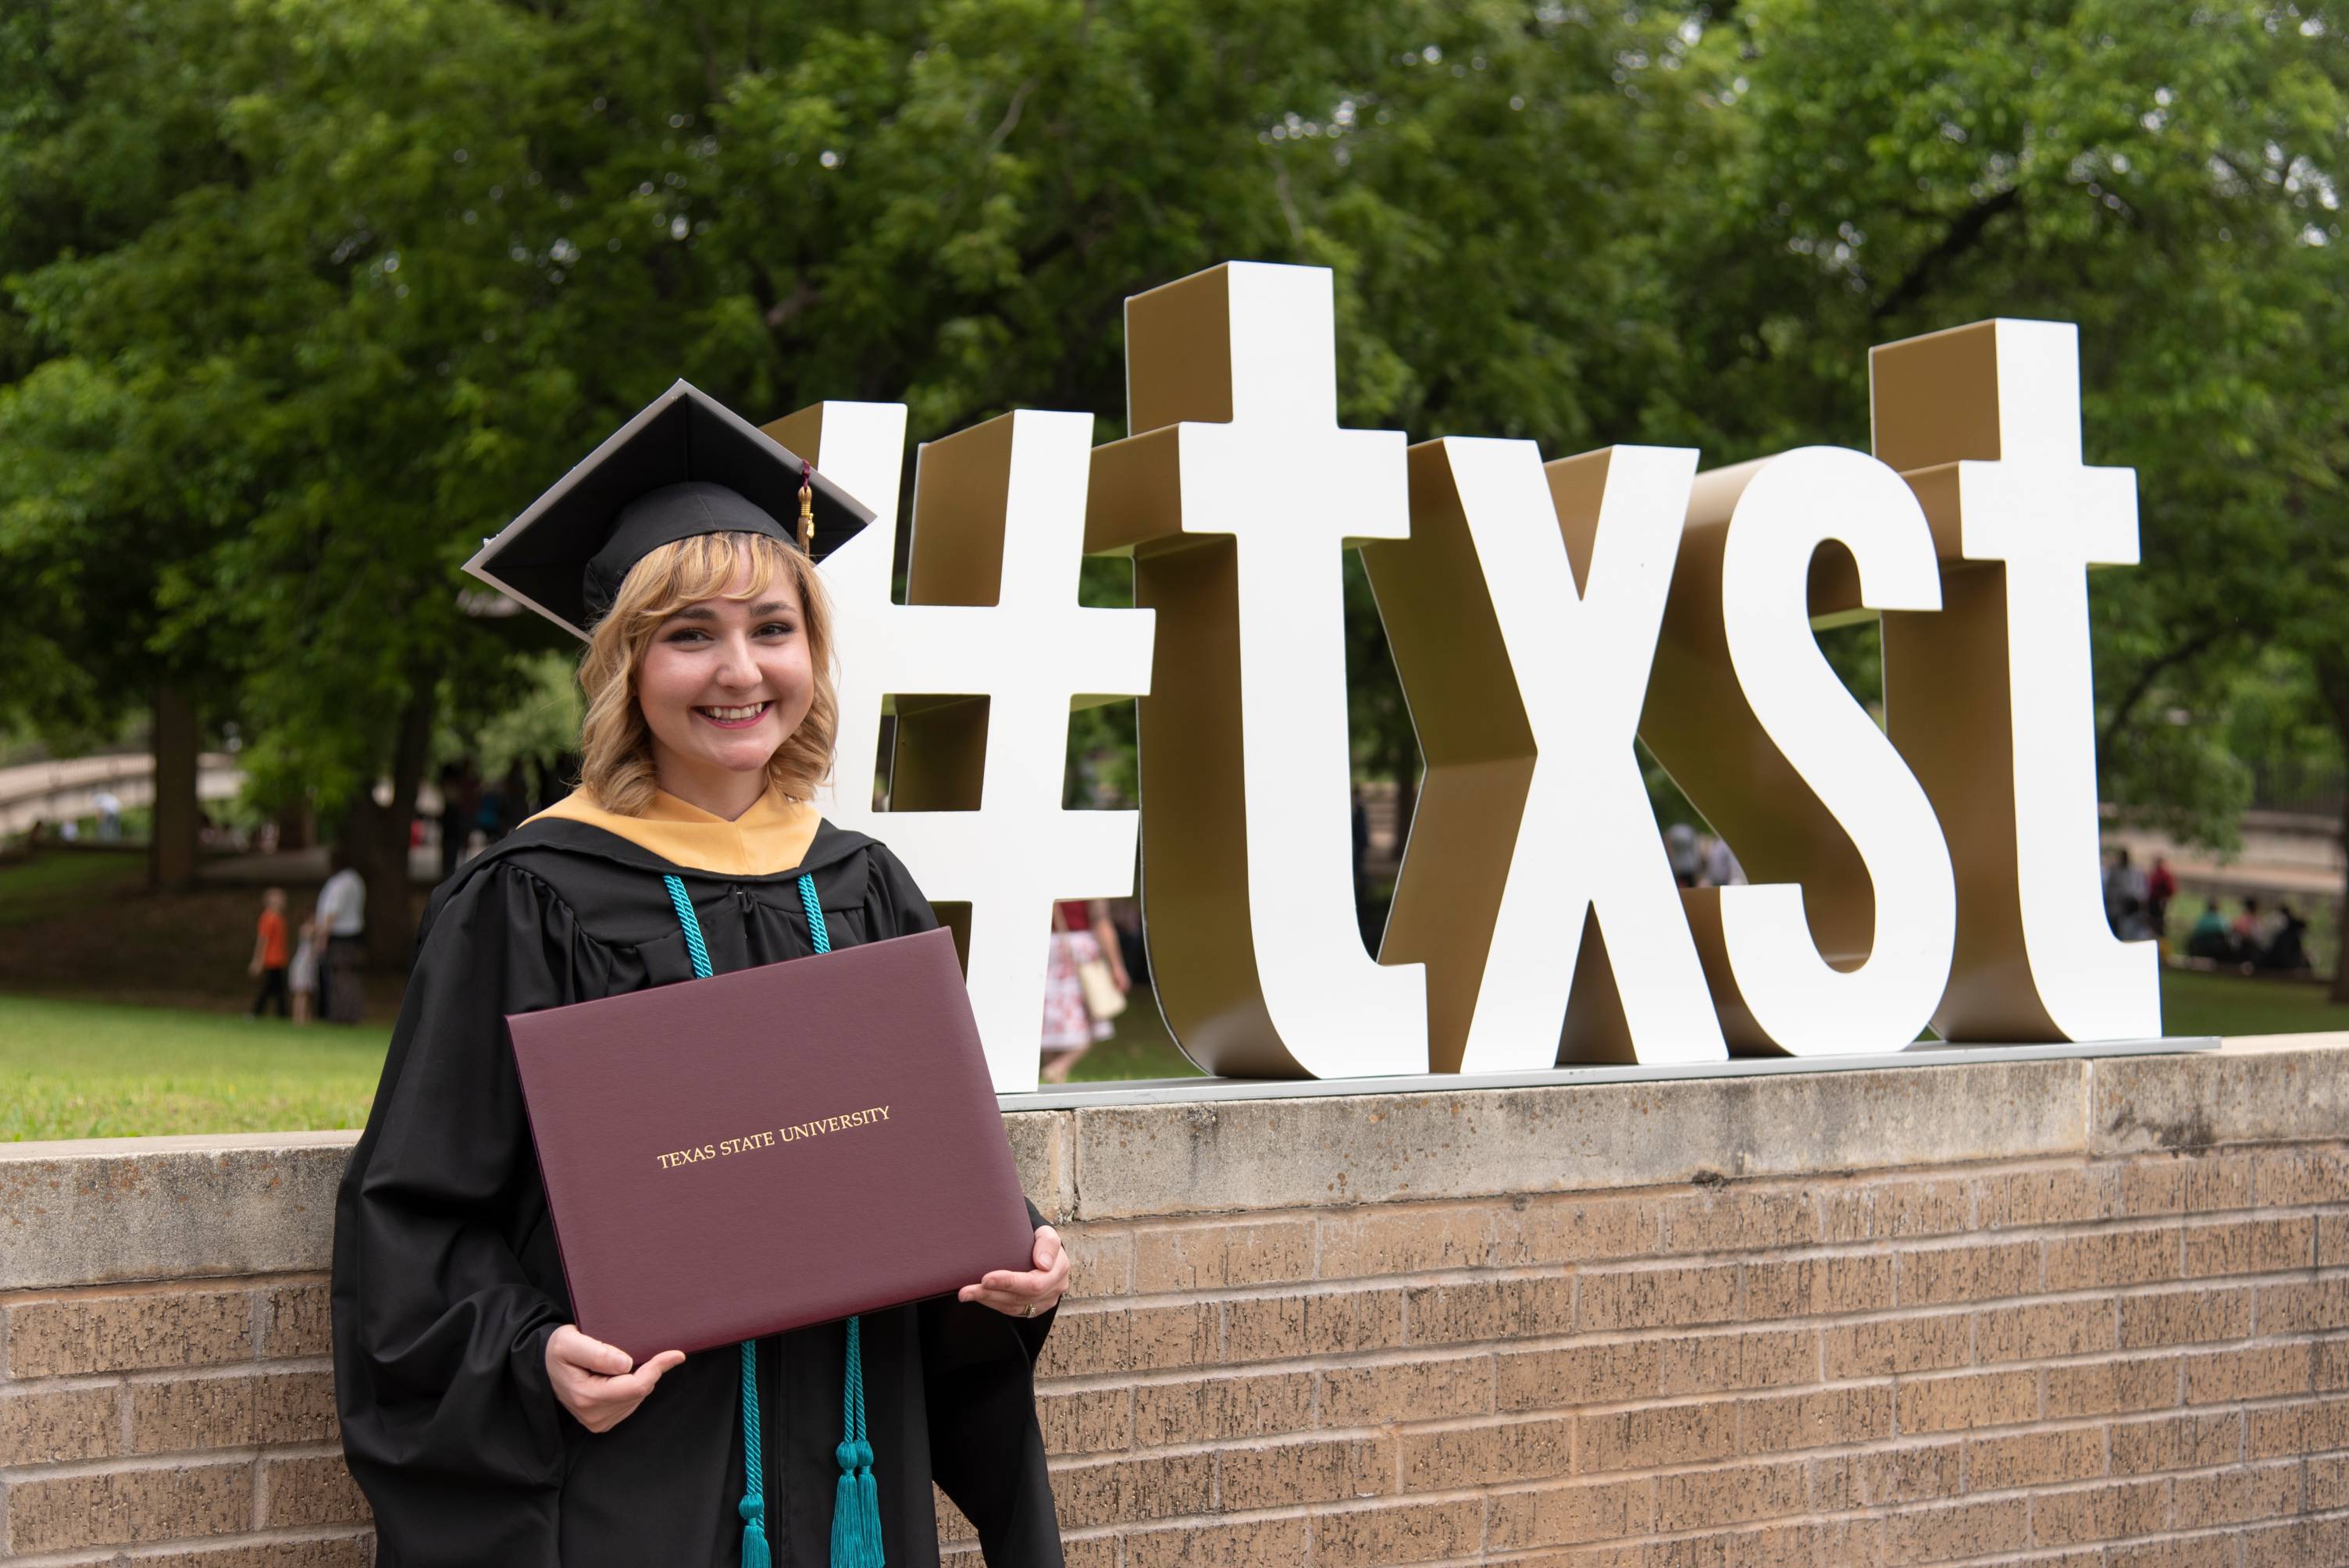 ‘Forbes’ names Texas State among “America’s Top Colleges”
for 2023